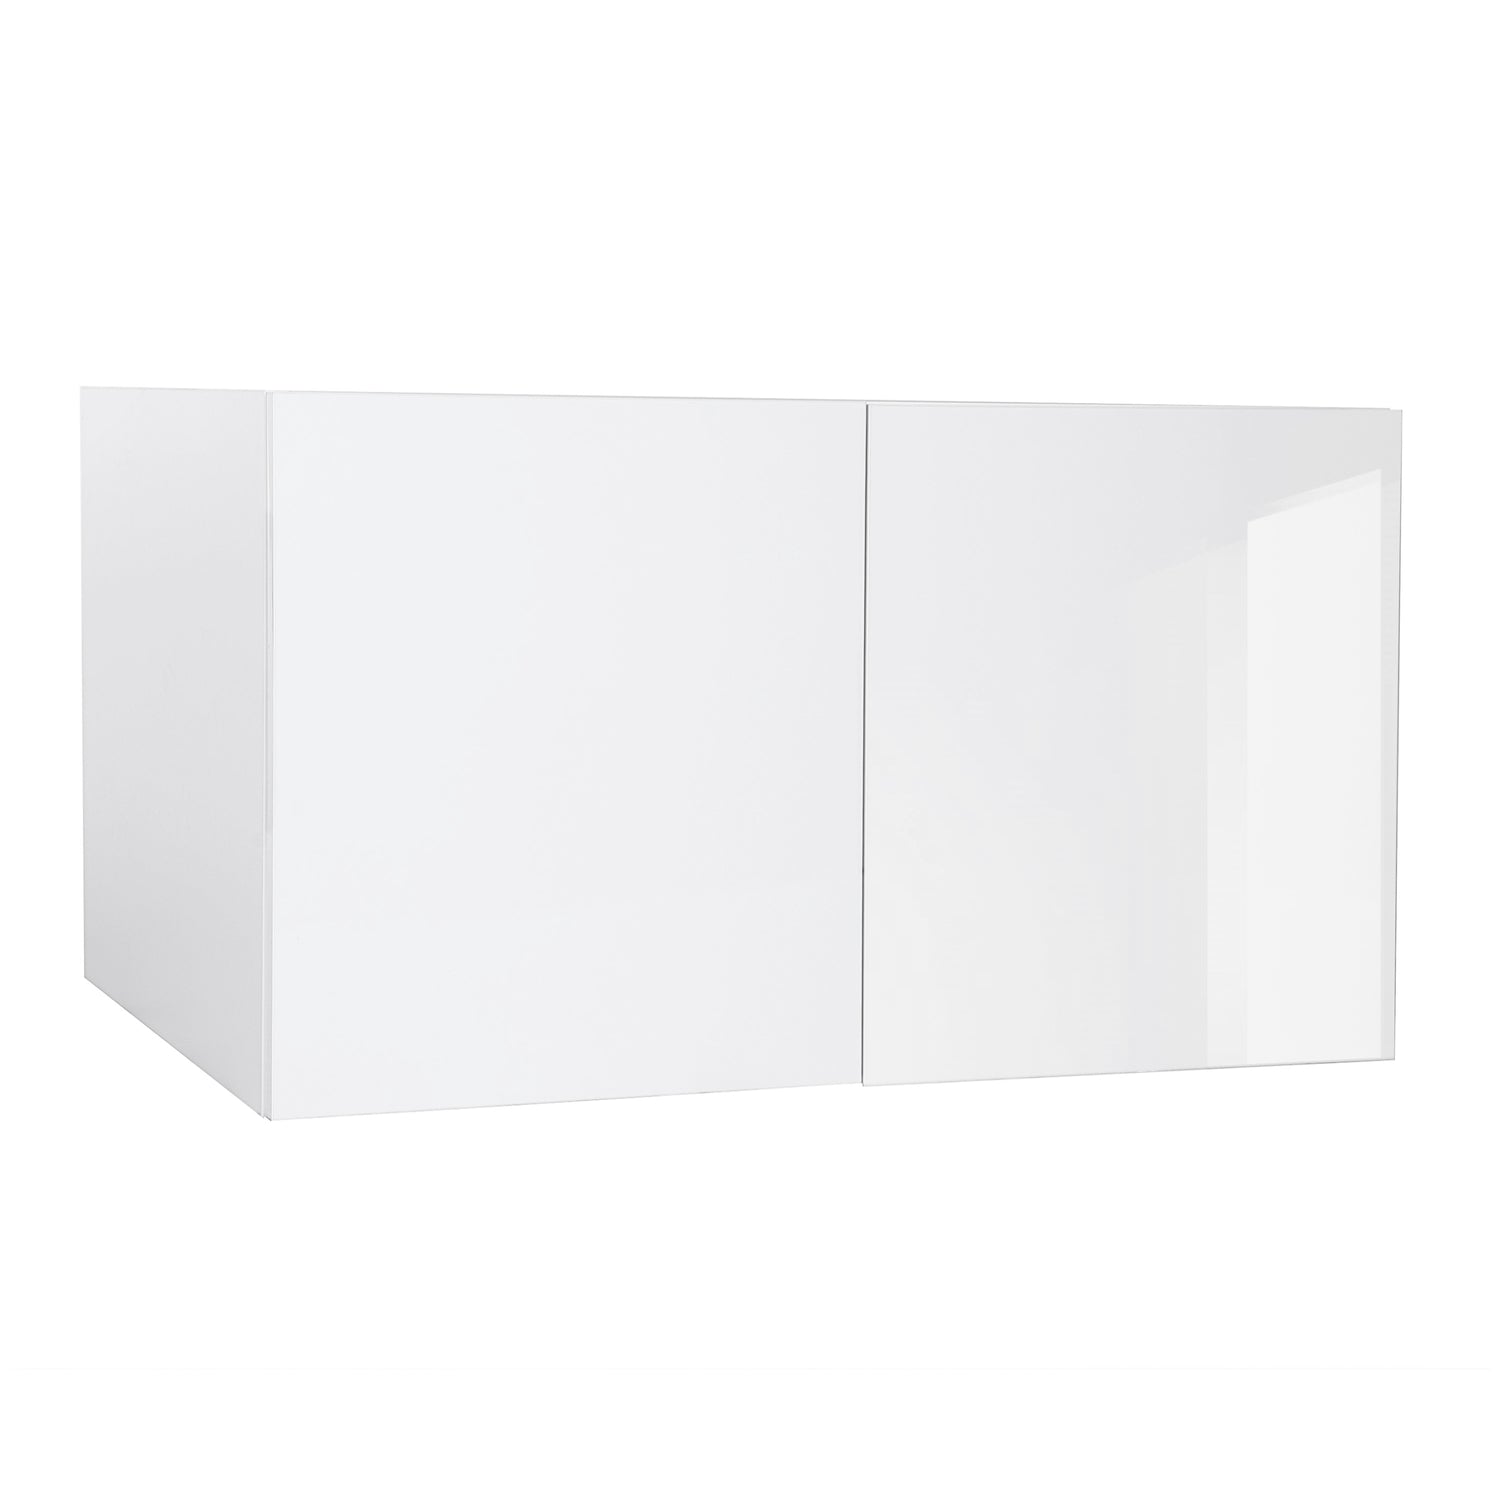 Quick Assemble Modern Style with Soft Close 33 in x 18 in Wall Bridge Kitchen Cabinet (33 in W x 18 in H x 12 in D) -  Pro-Edge HD